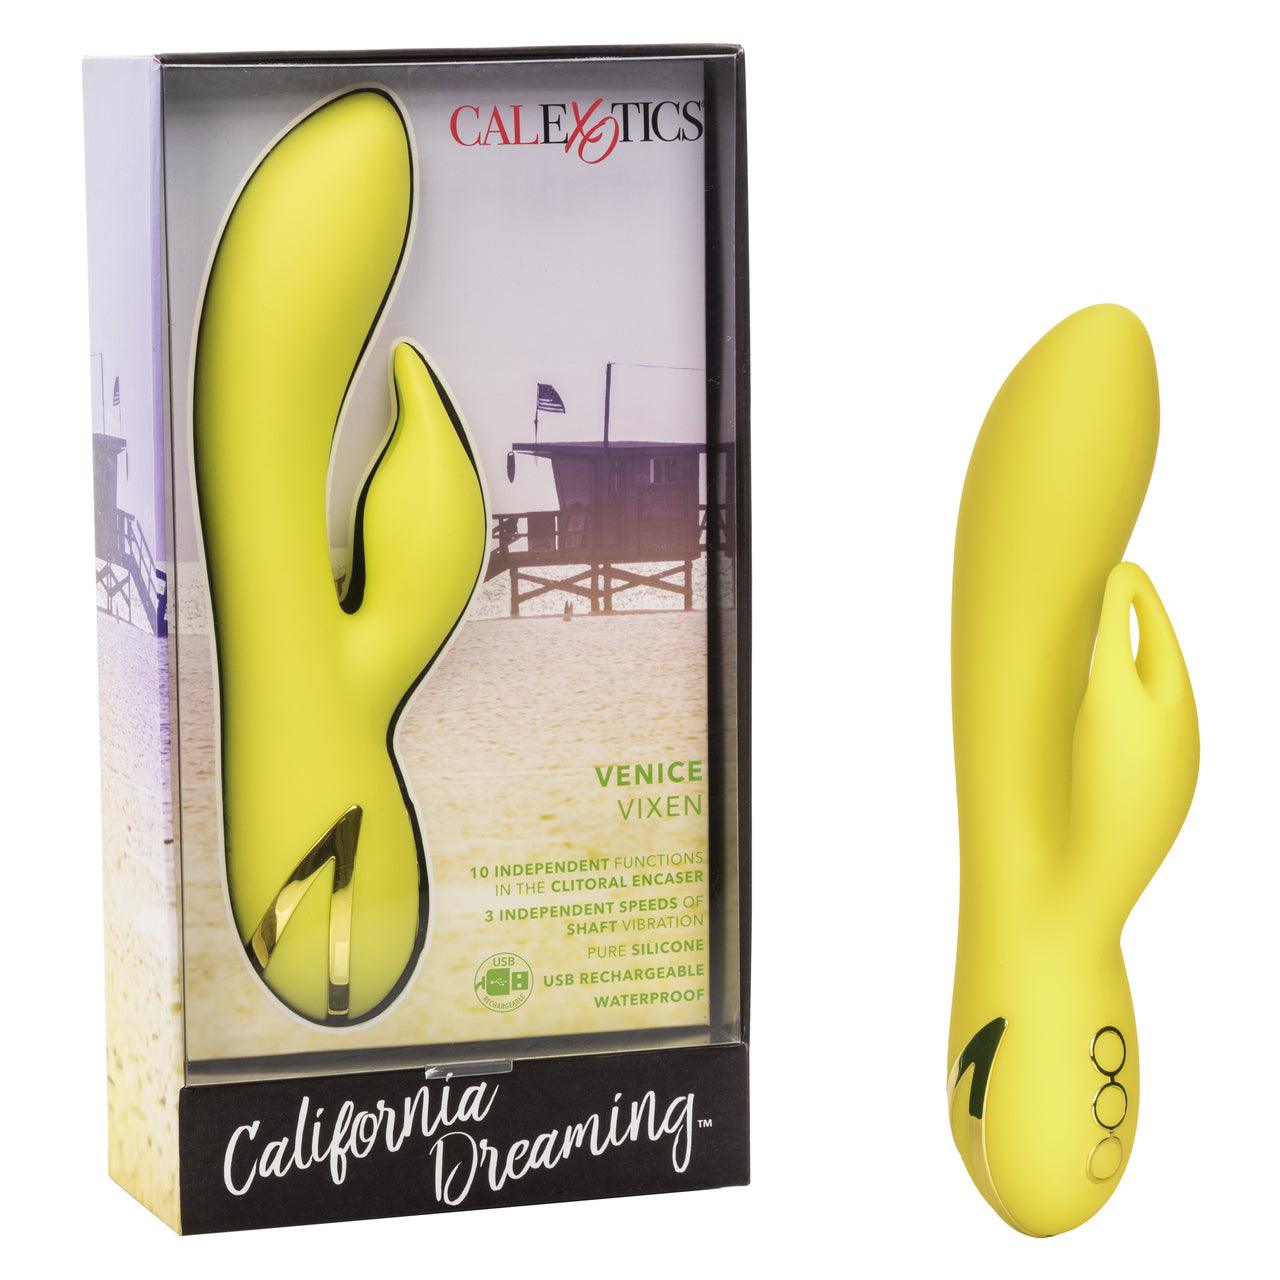 California Dreaming Venice Vixen - Buy At Luxury Toy X - Free 3-Day Shipping